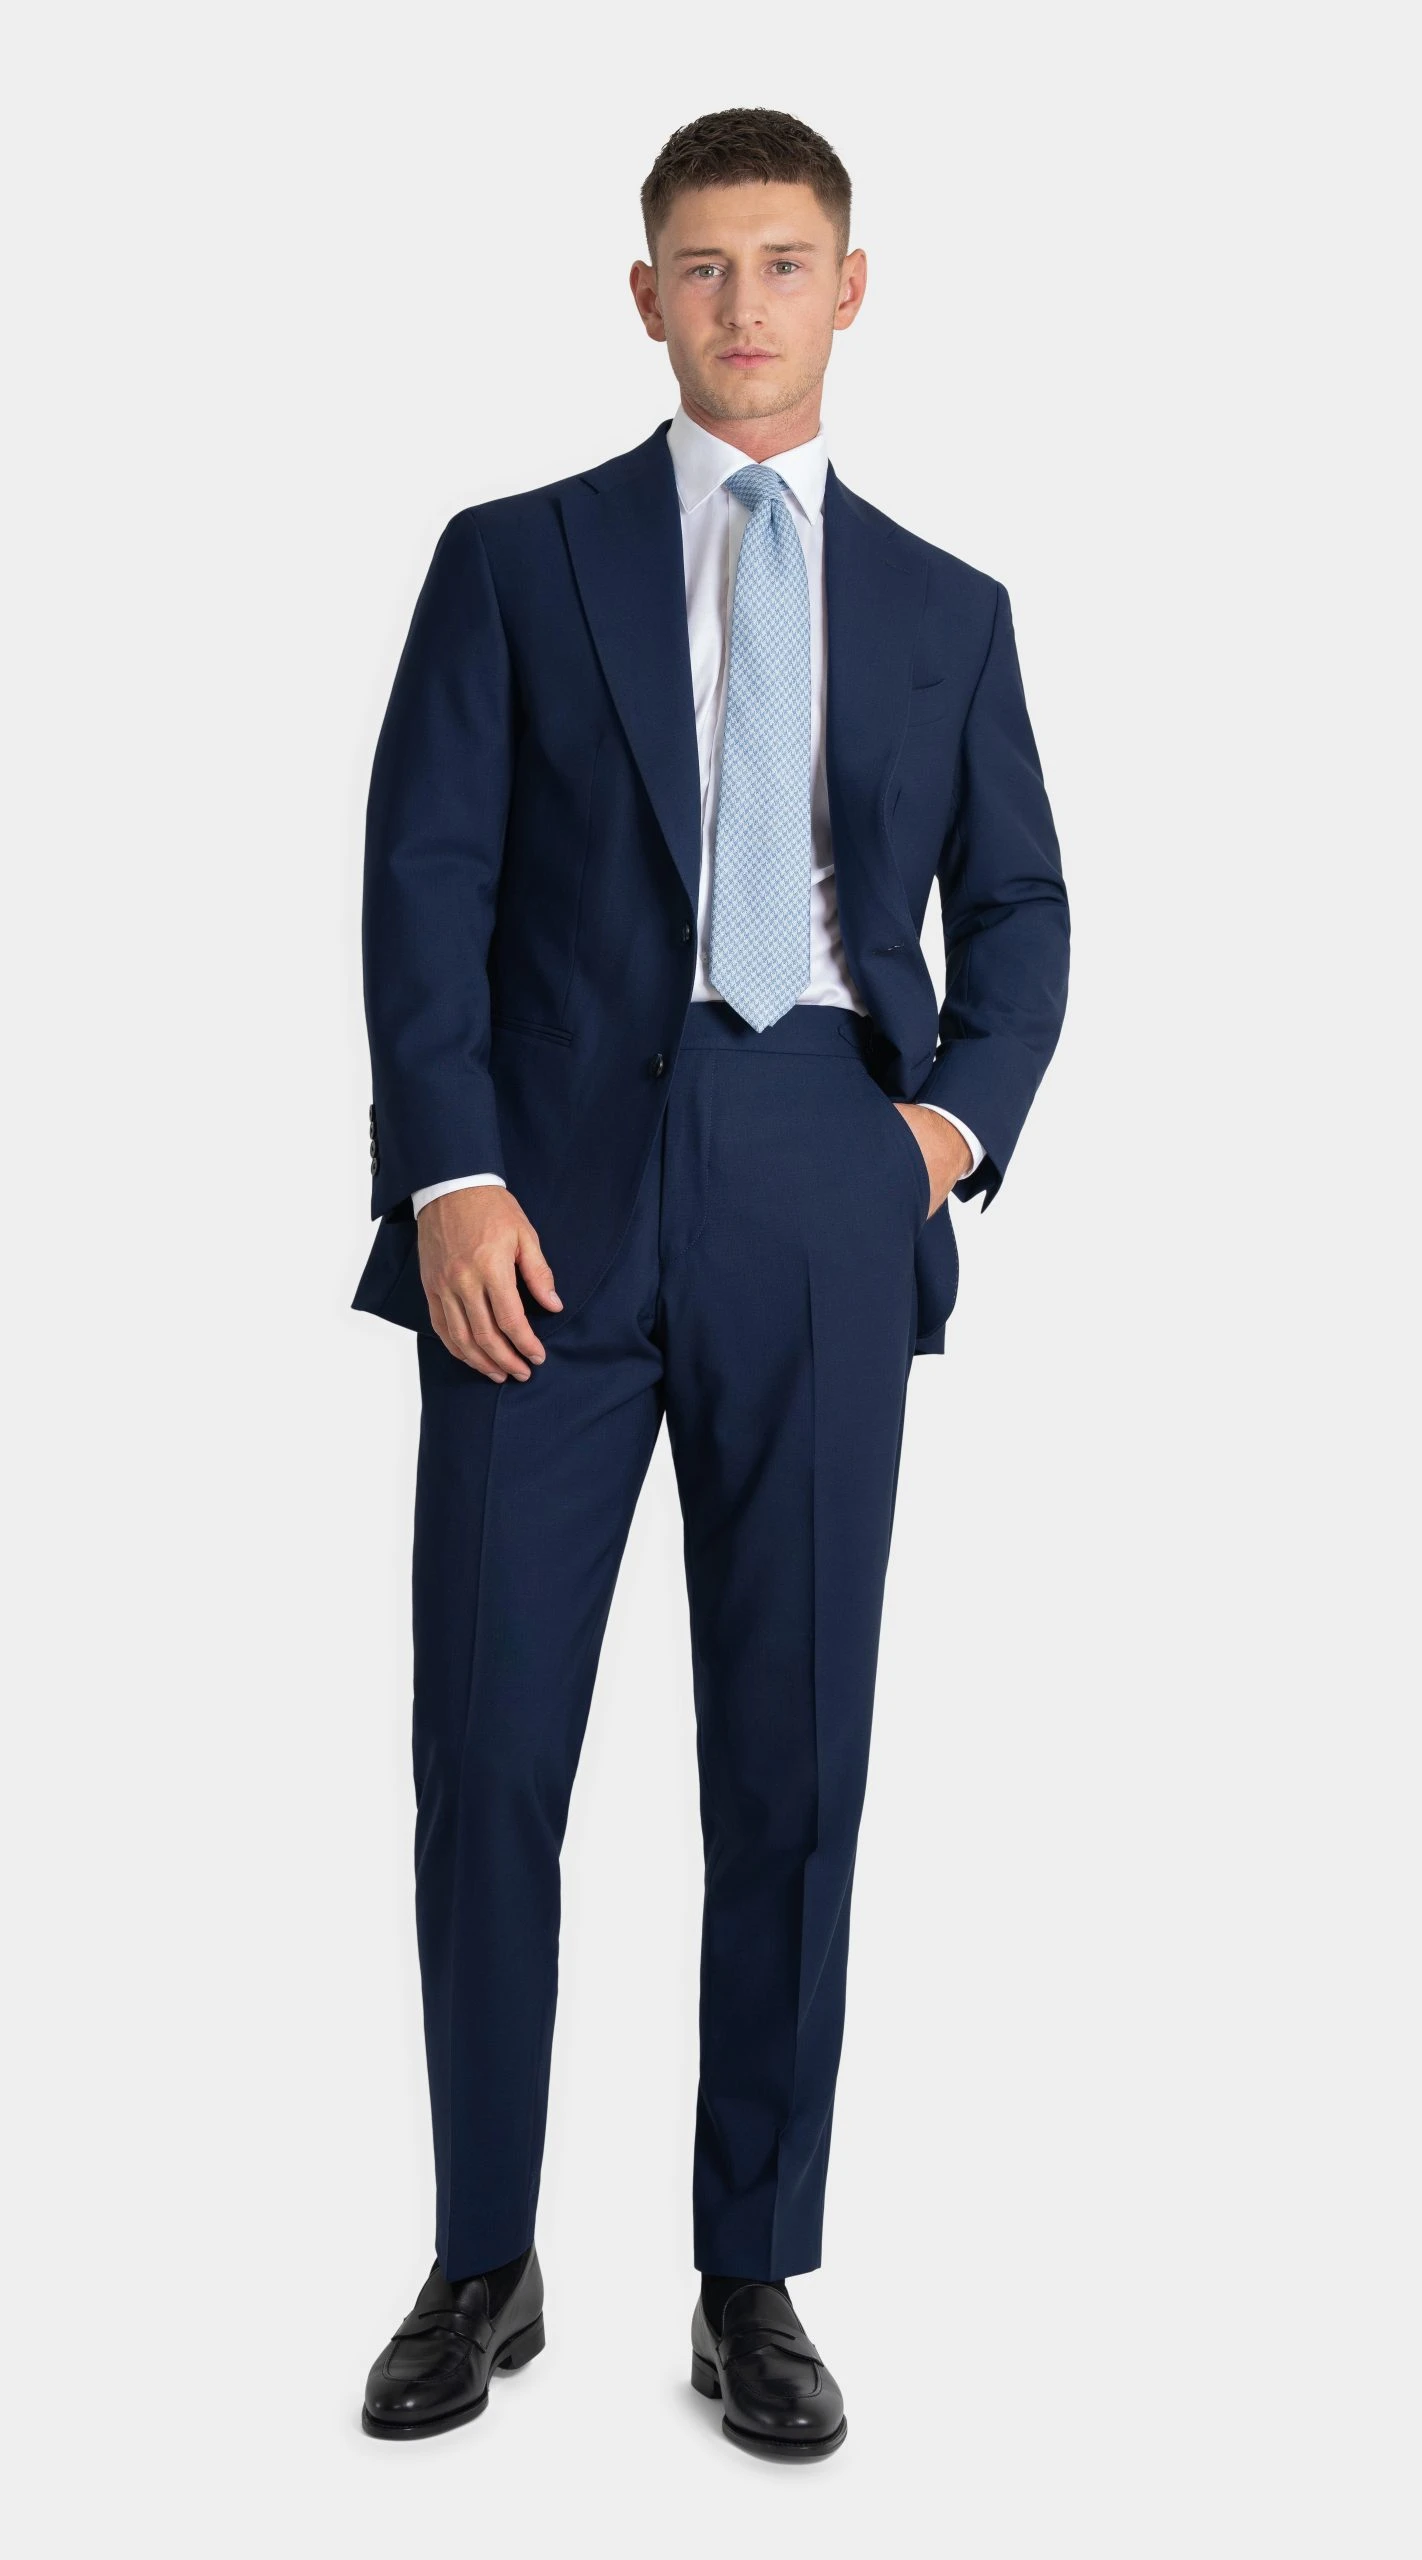 blue suit in twistair, with black shoes